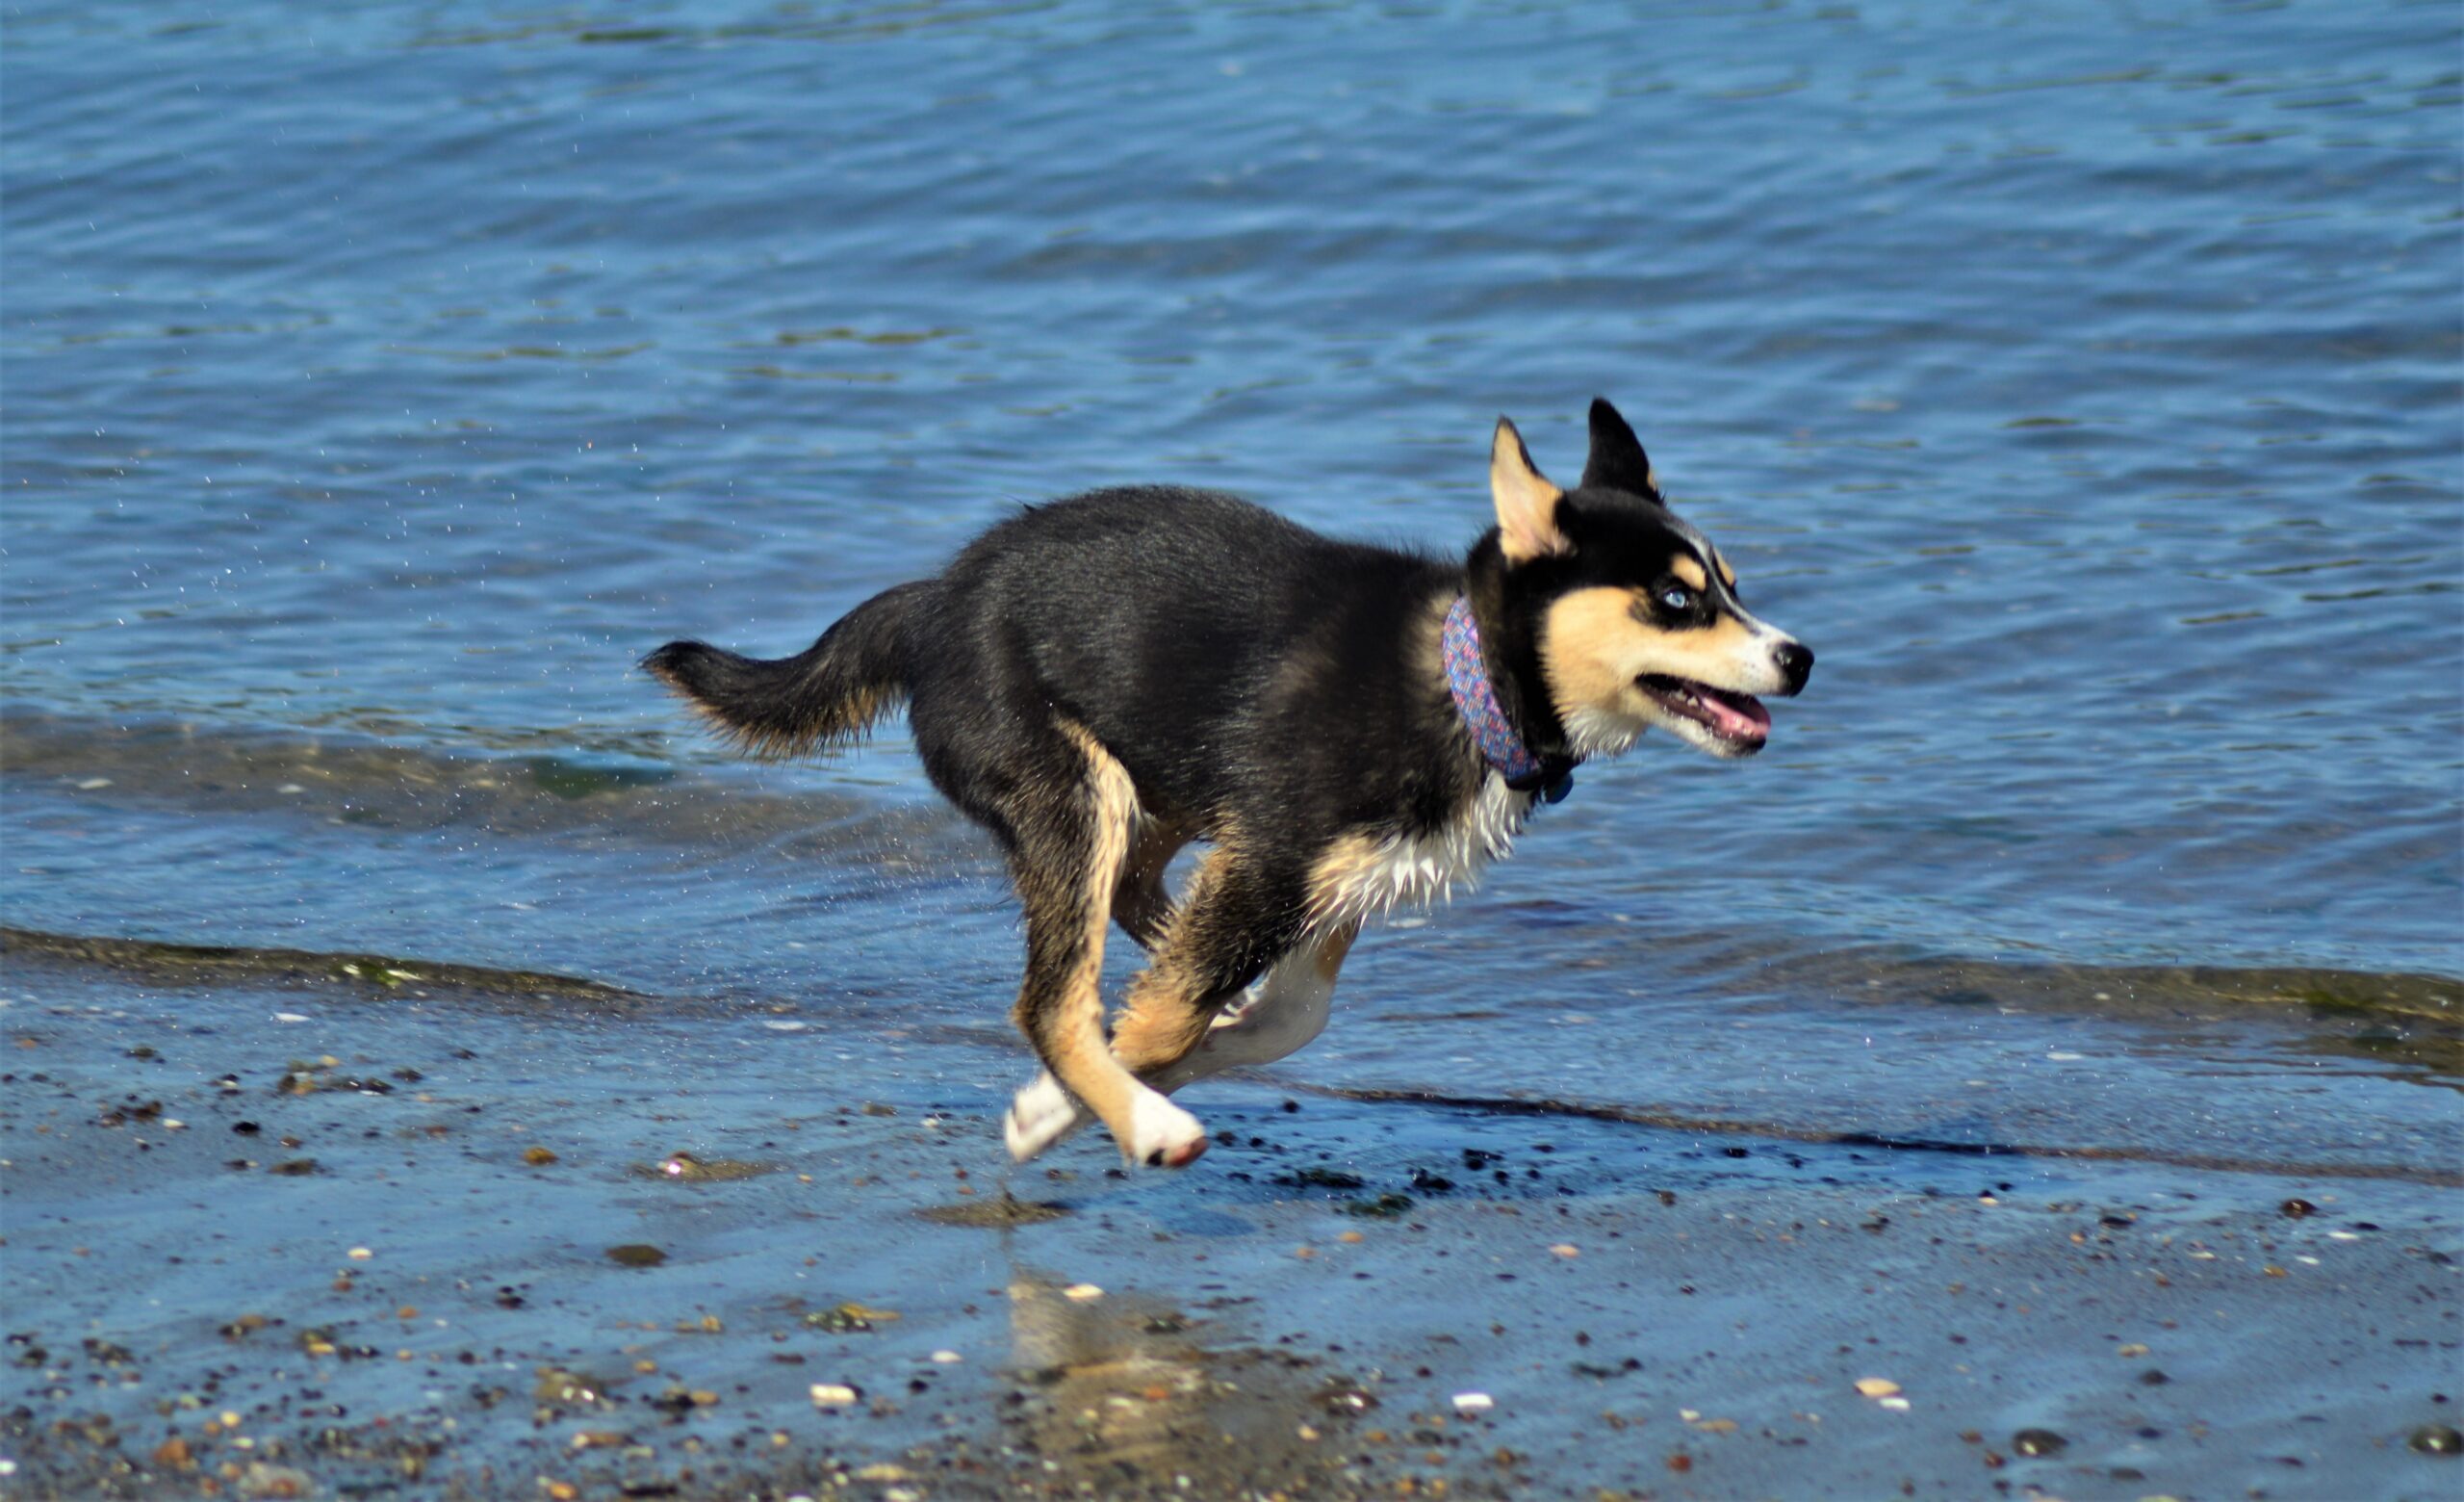 A young dog cools off at the beach